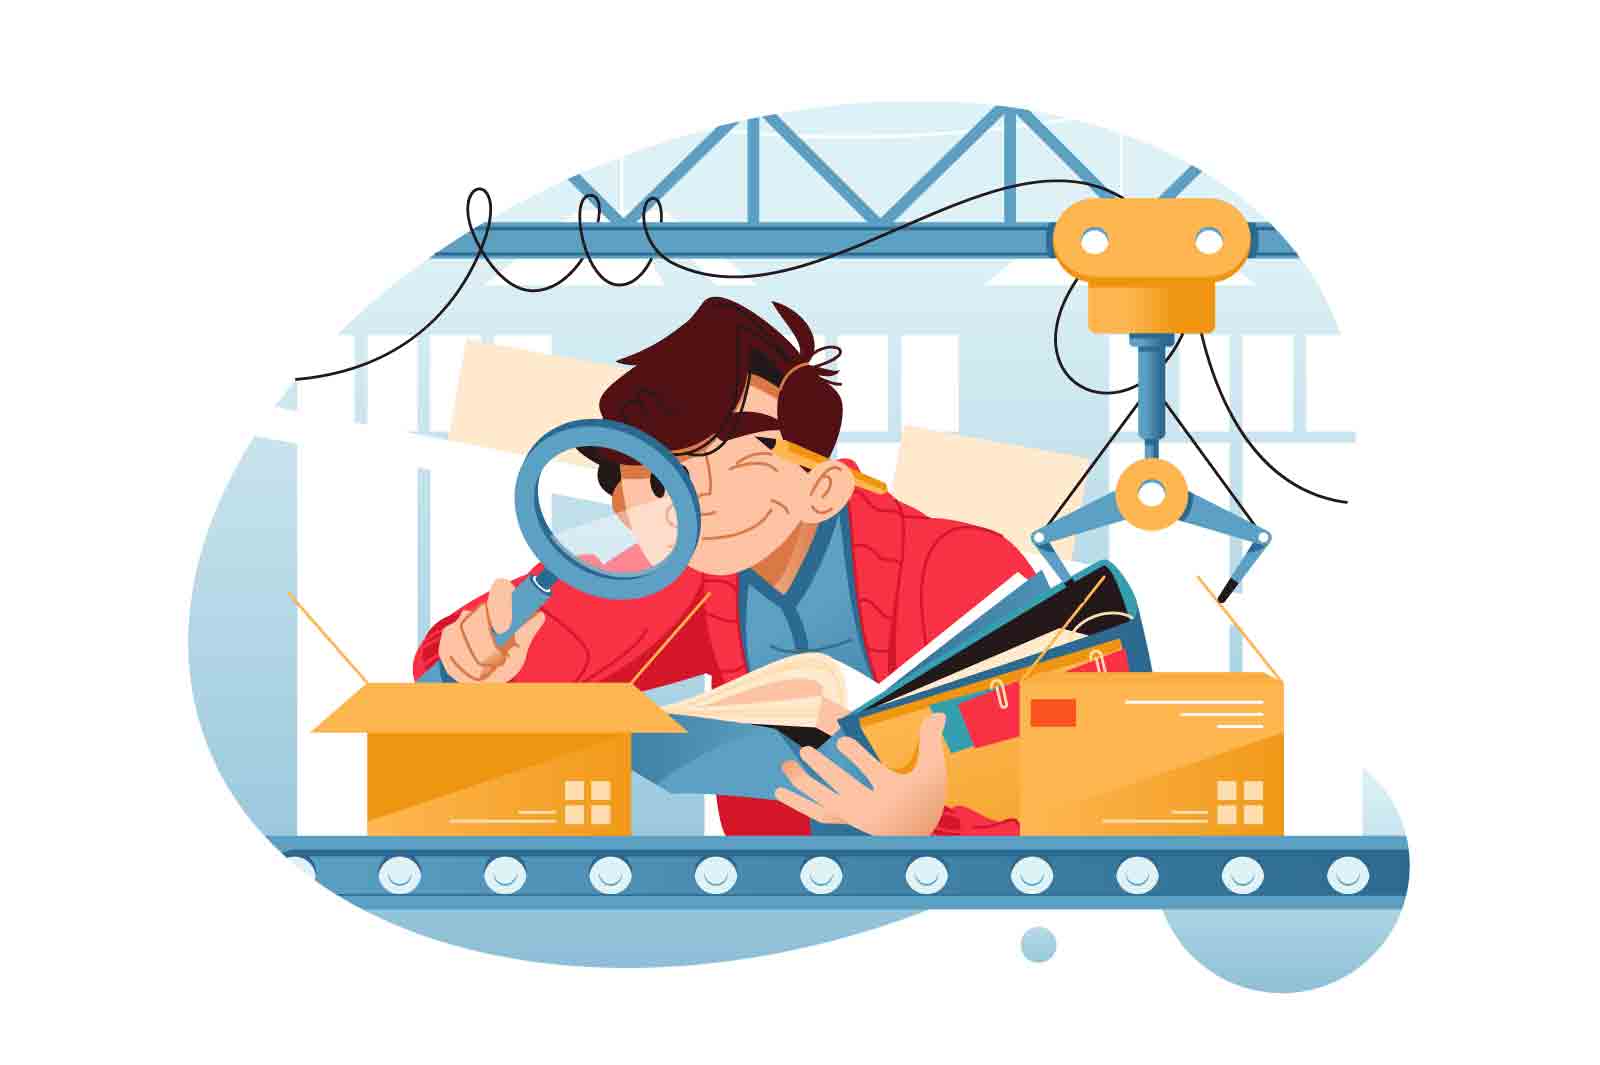 Person inspects moving box with magnifying glass in factory setting with conveyor and manipulator in background, vector illustration.